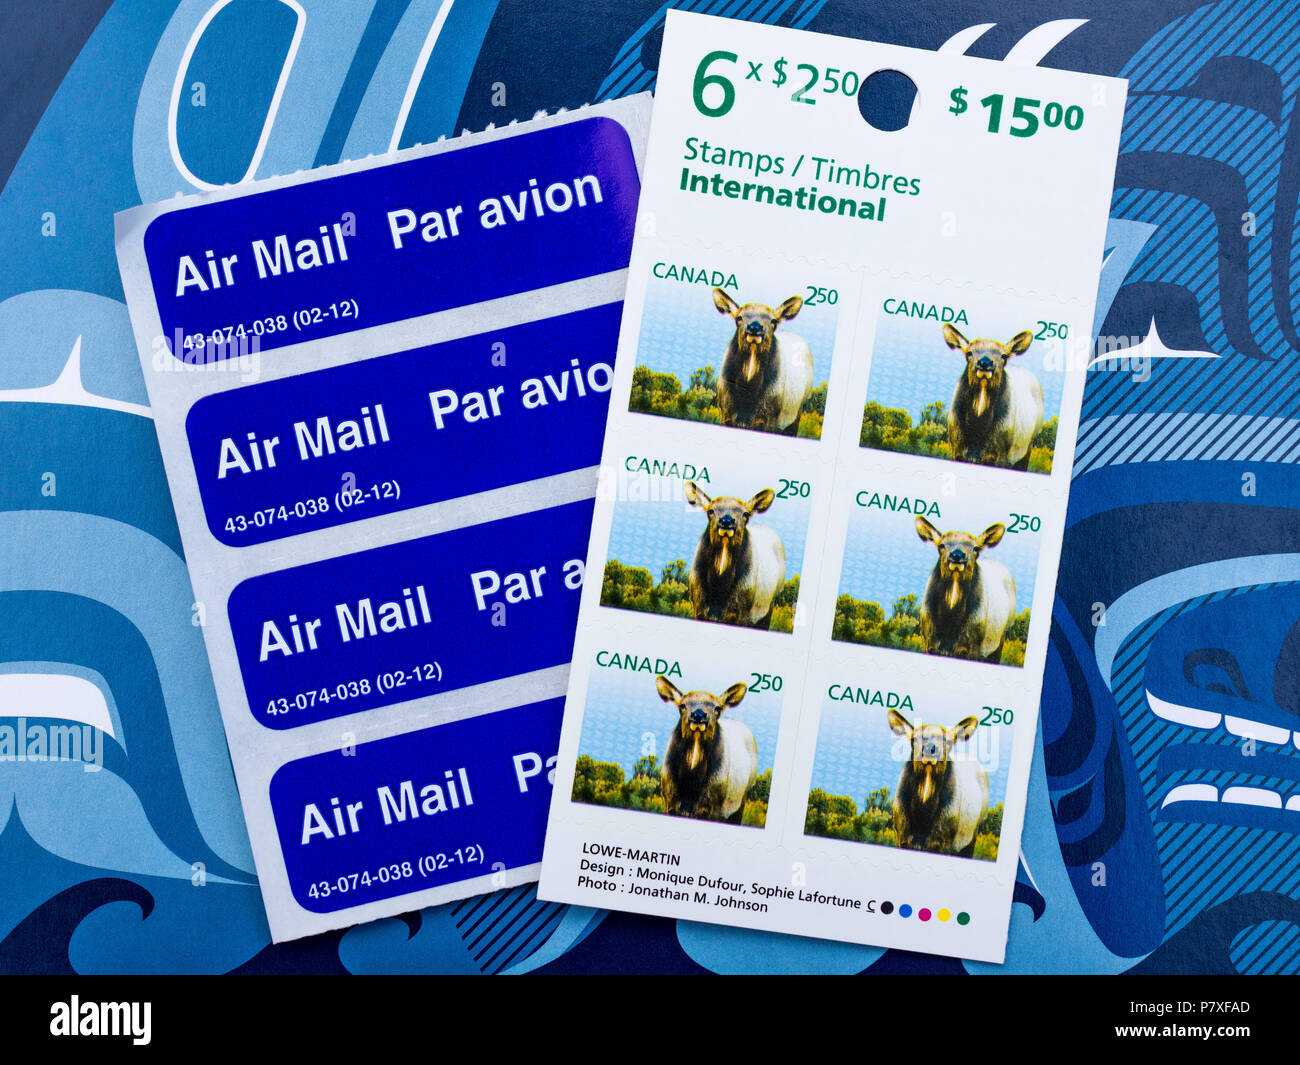 Sheet of Canadian self-adhesive stamps for international use. Stock Photo